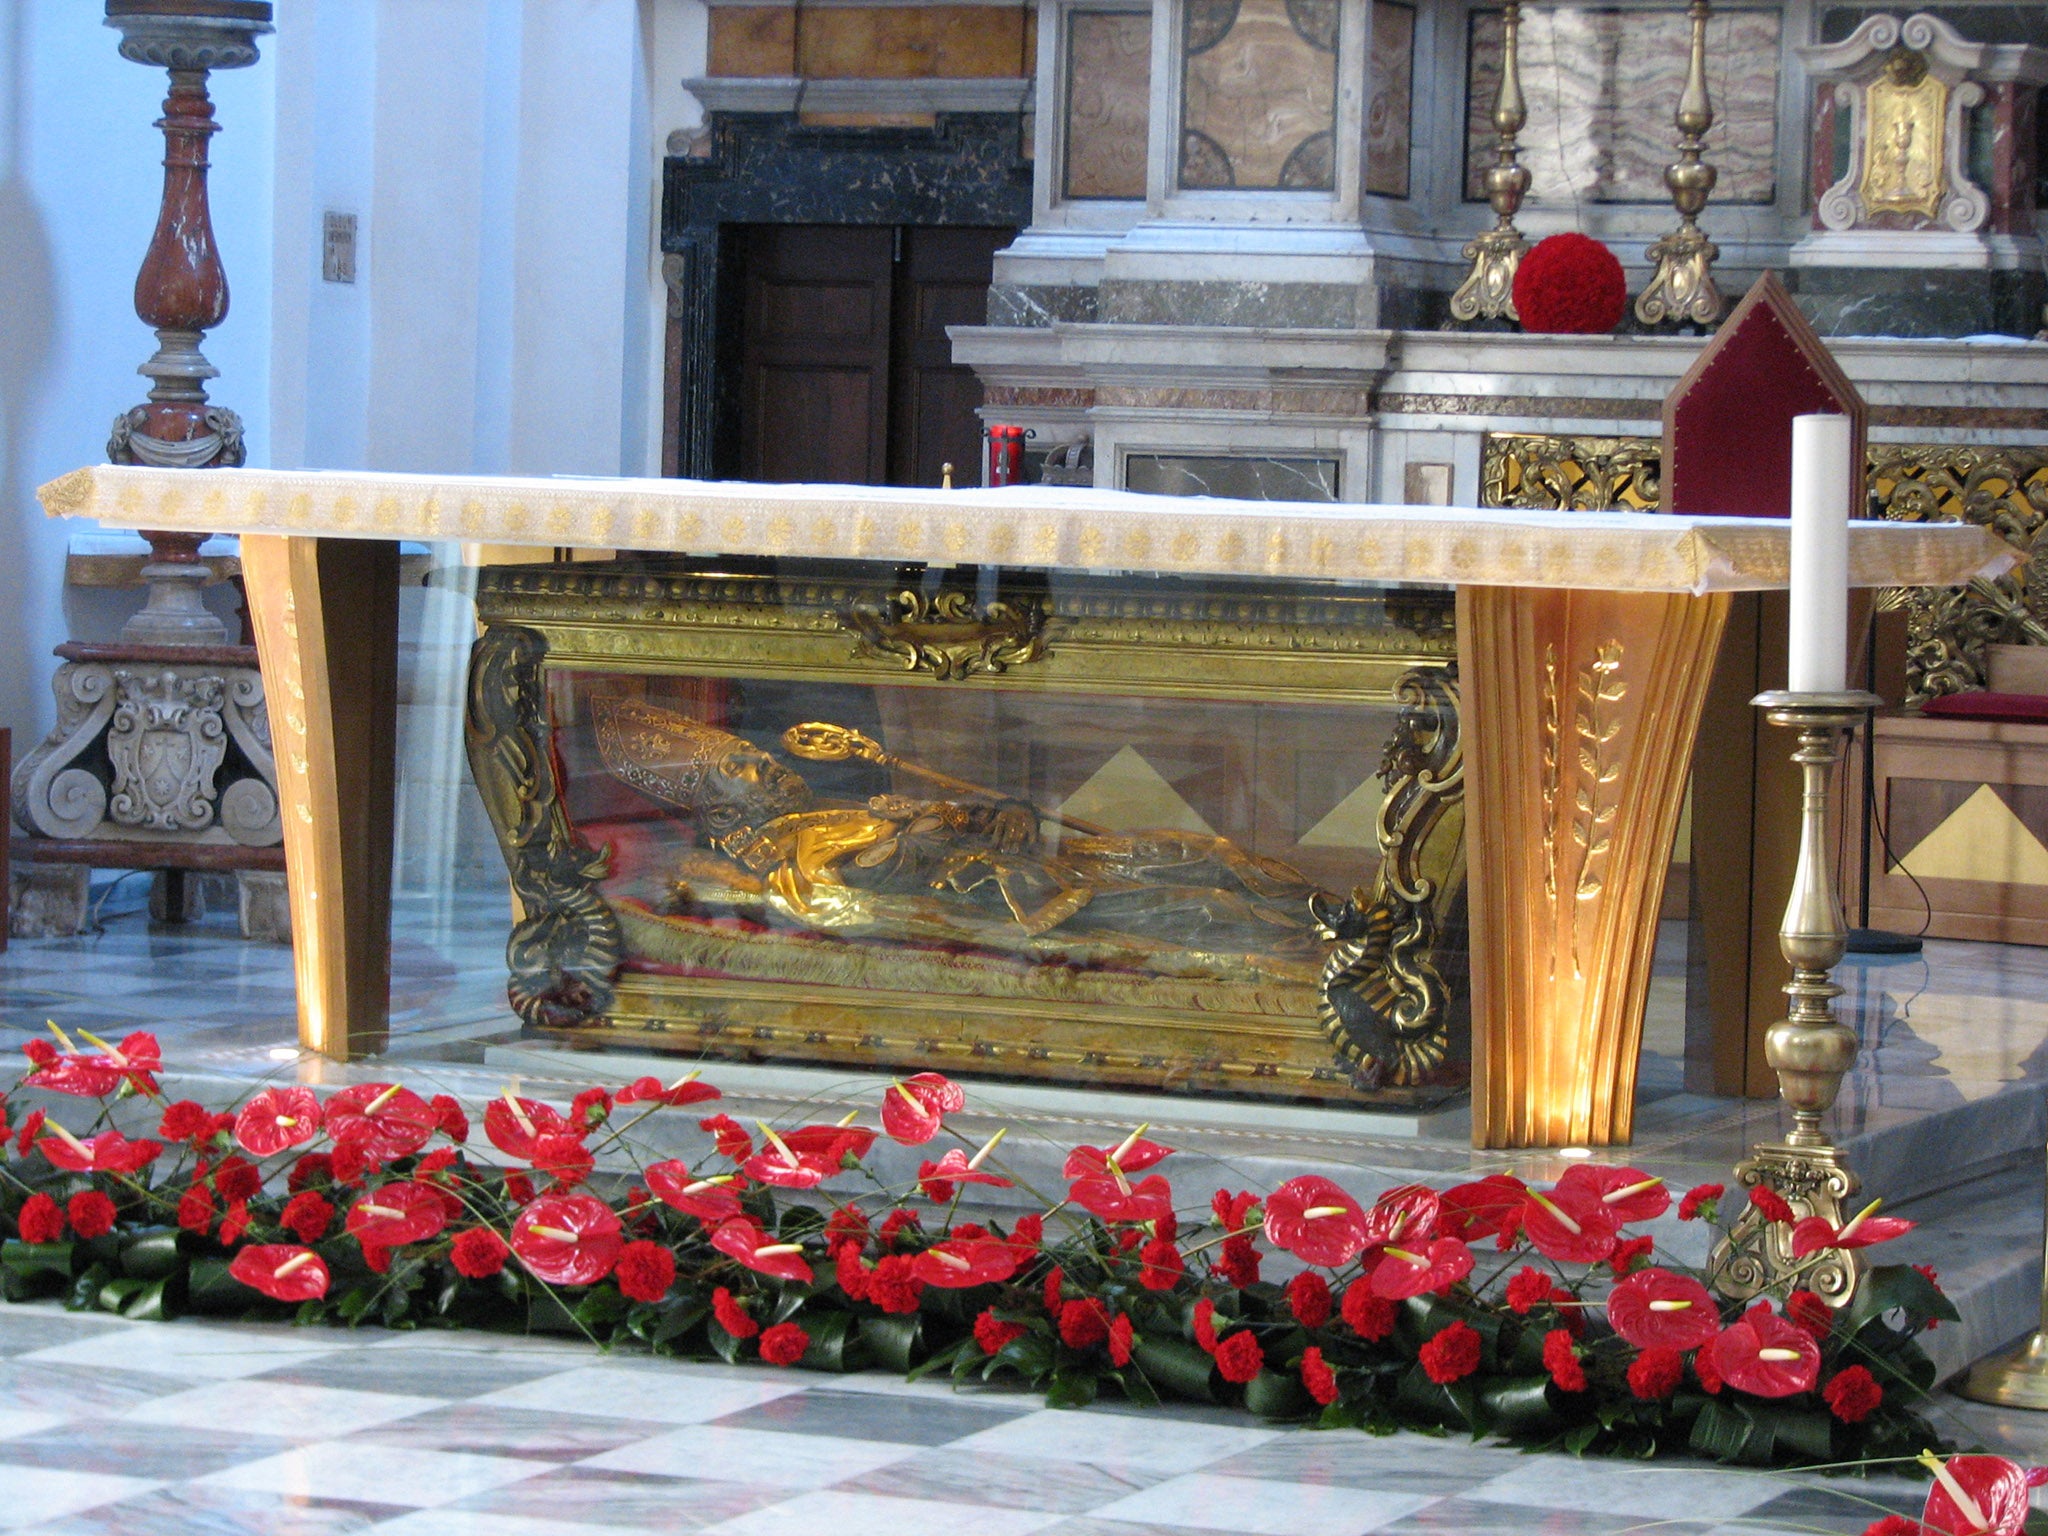 The remains of St Valentine in a glass coffin in Treni, central Italy